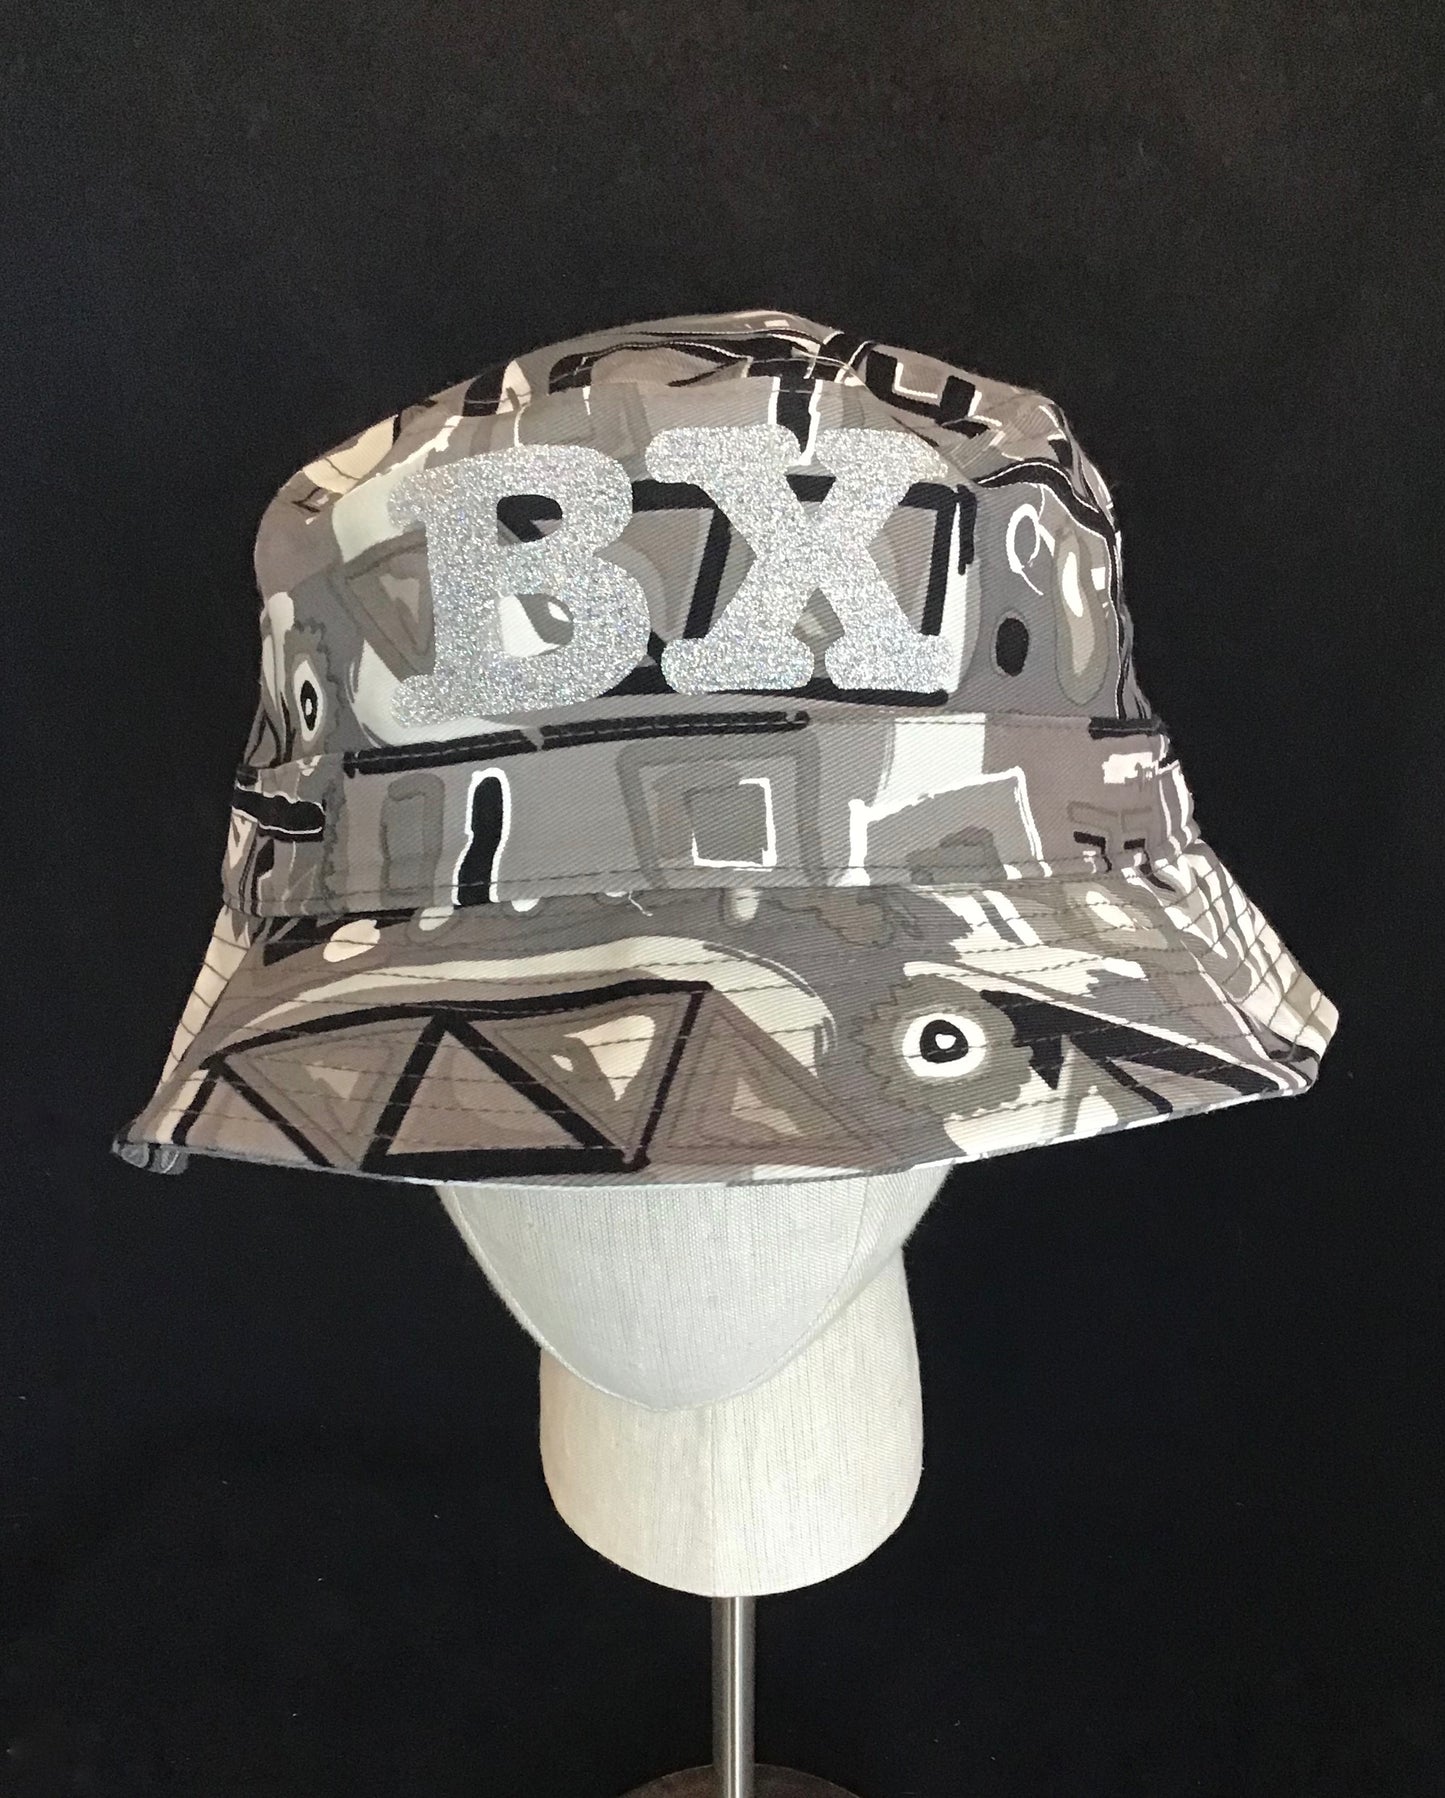 BX bucket abstract blk/ wht L 23 1/4"